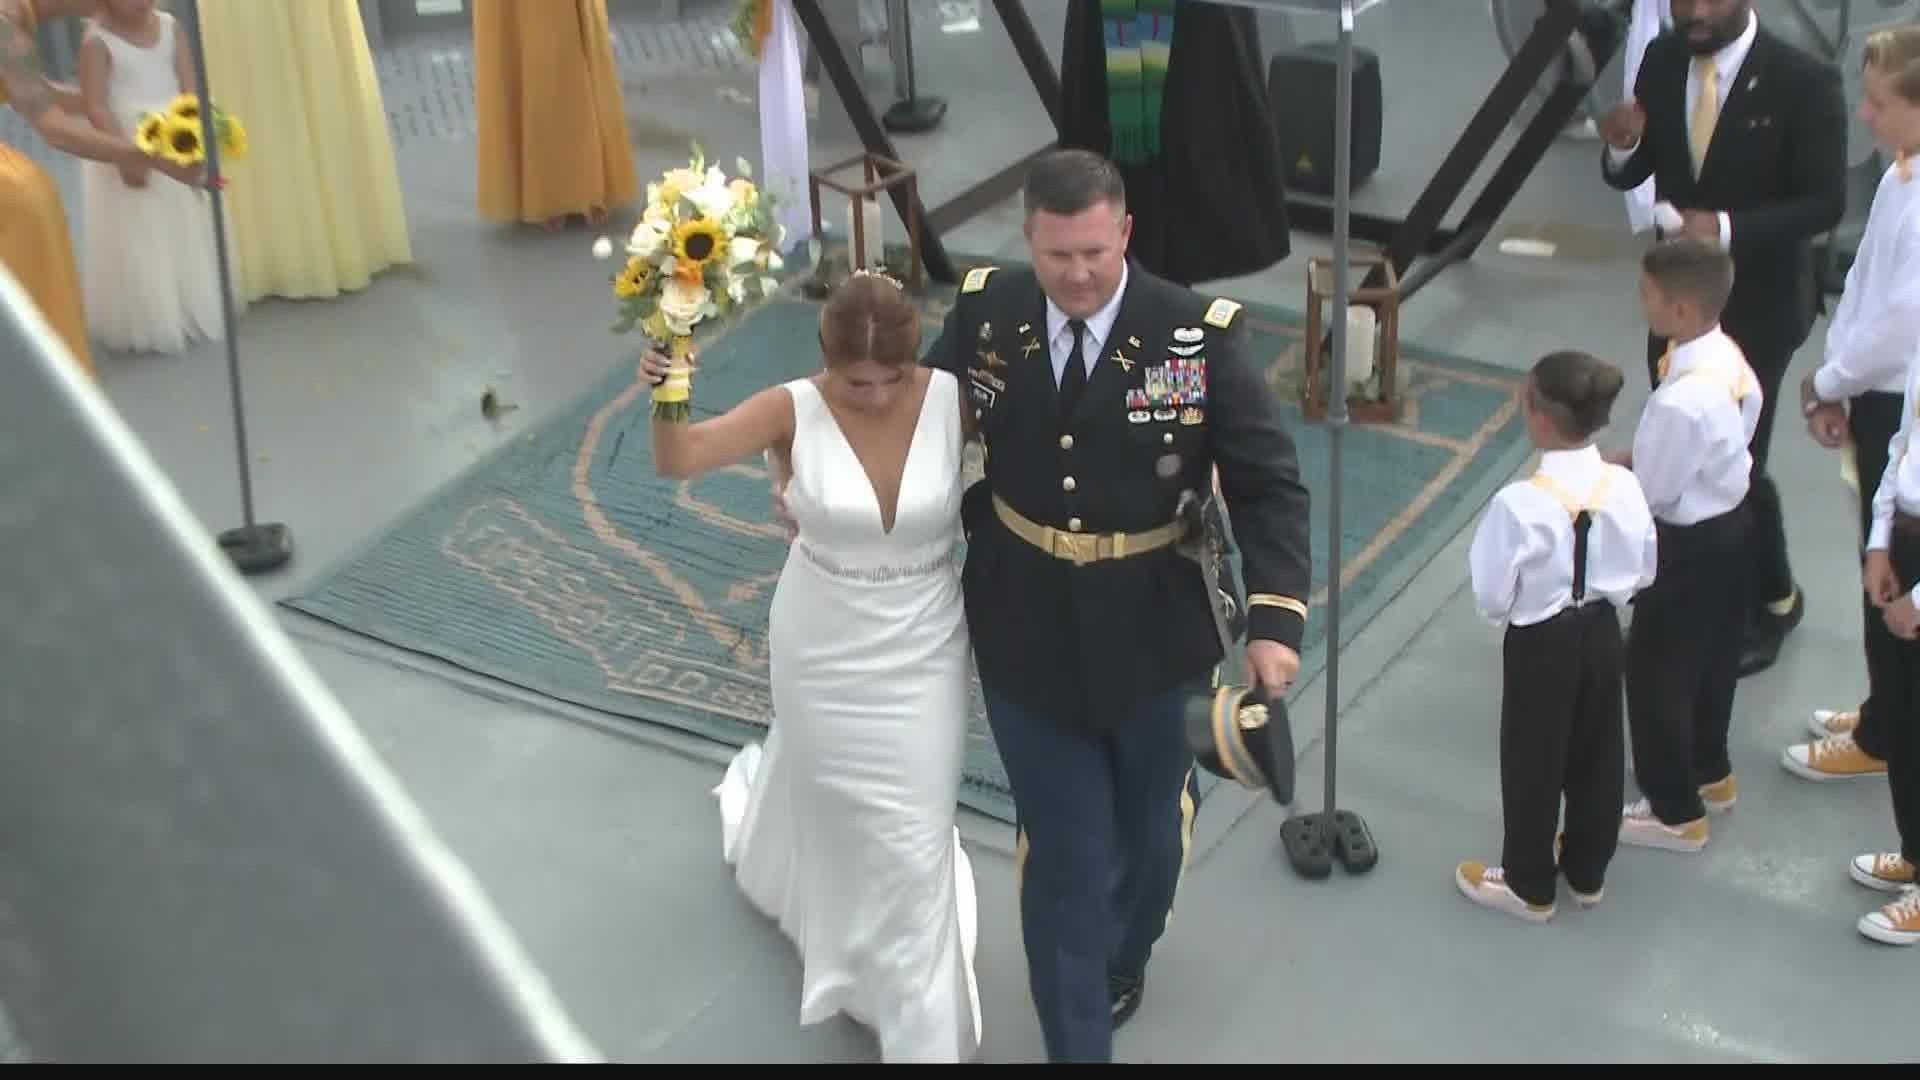 Anchors aweigh! Adam and Allyson Dillon celebrated their wedding on the USS Orleck.